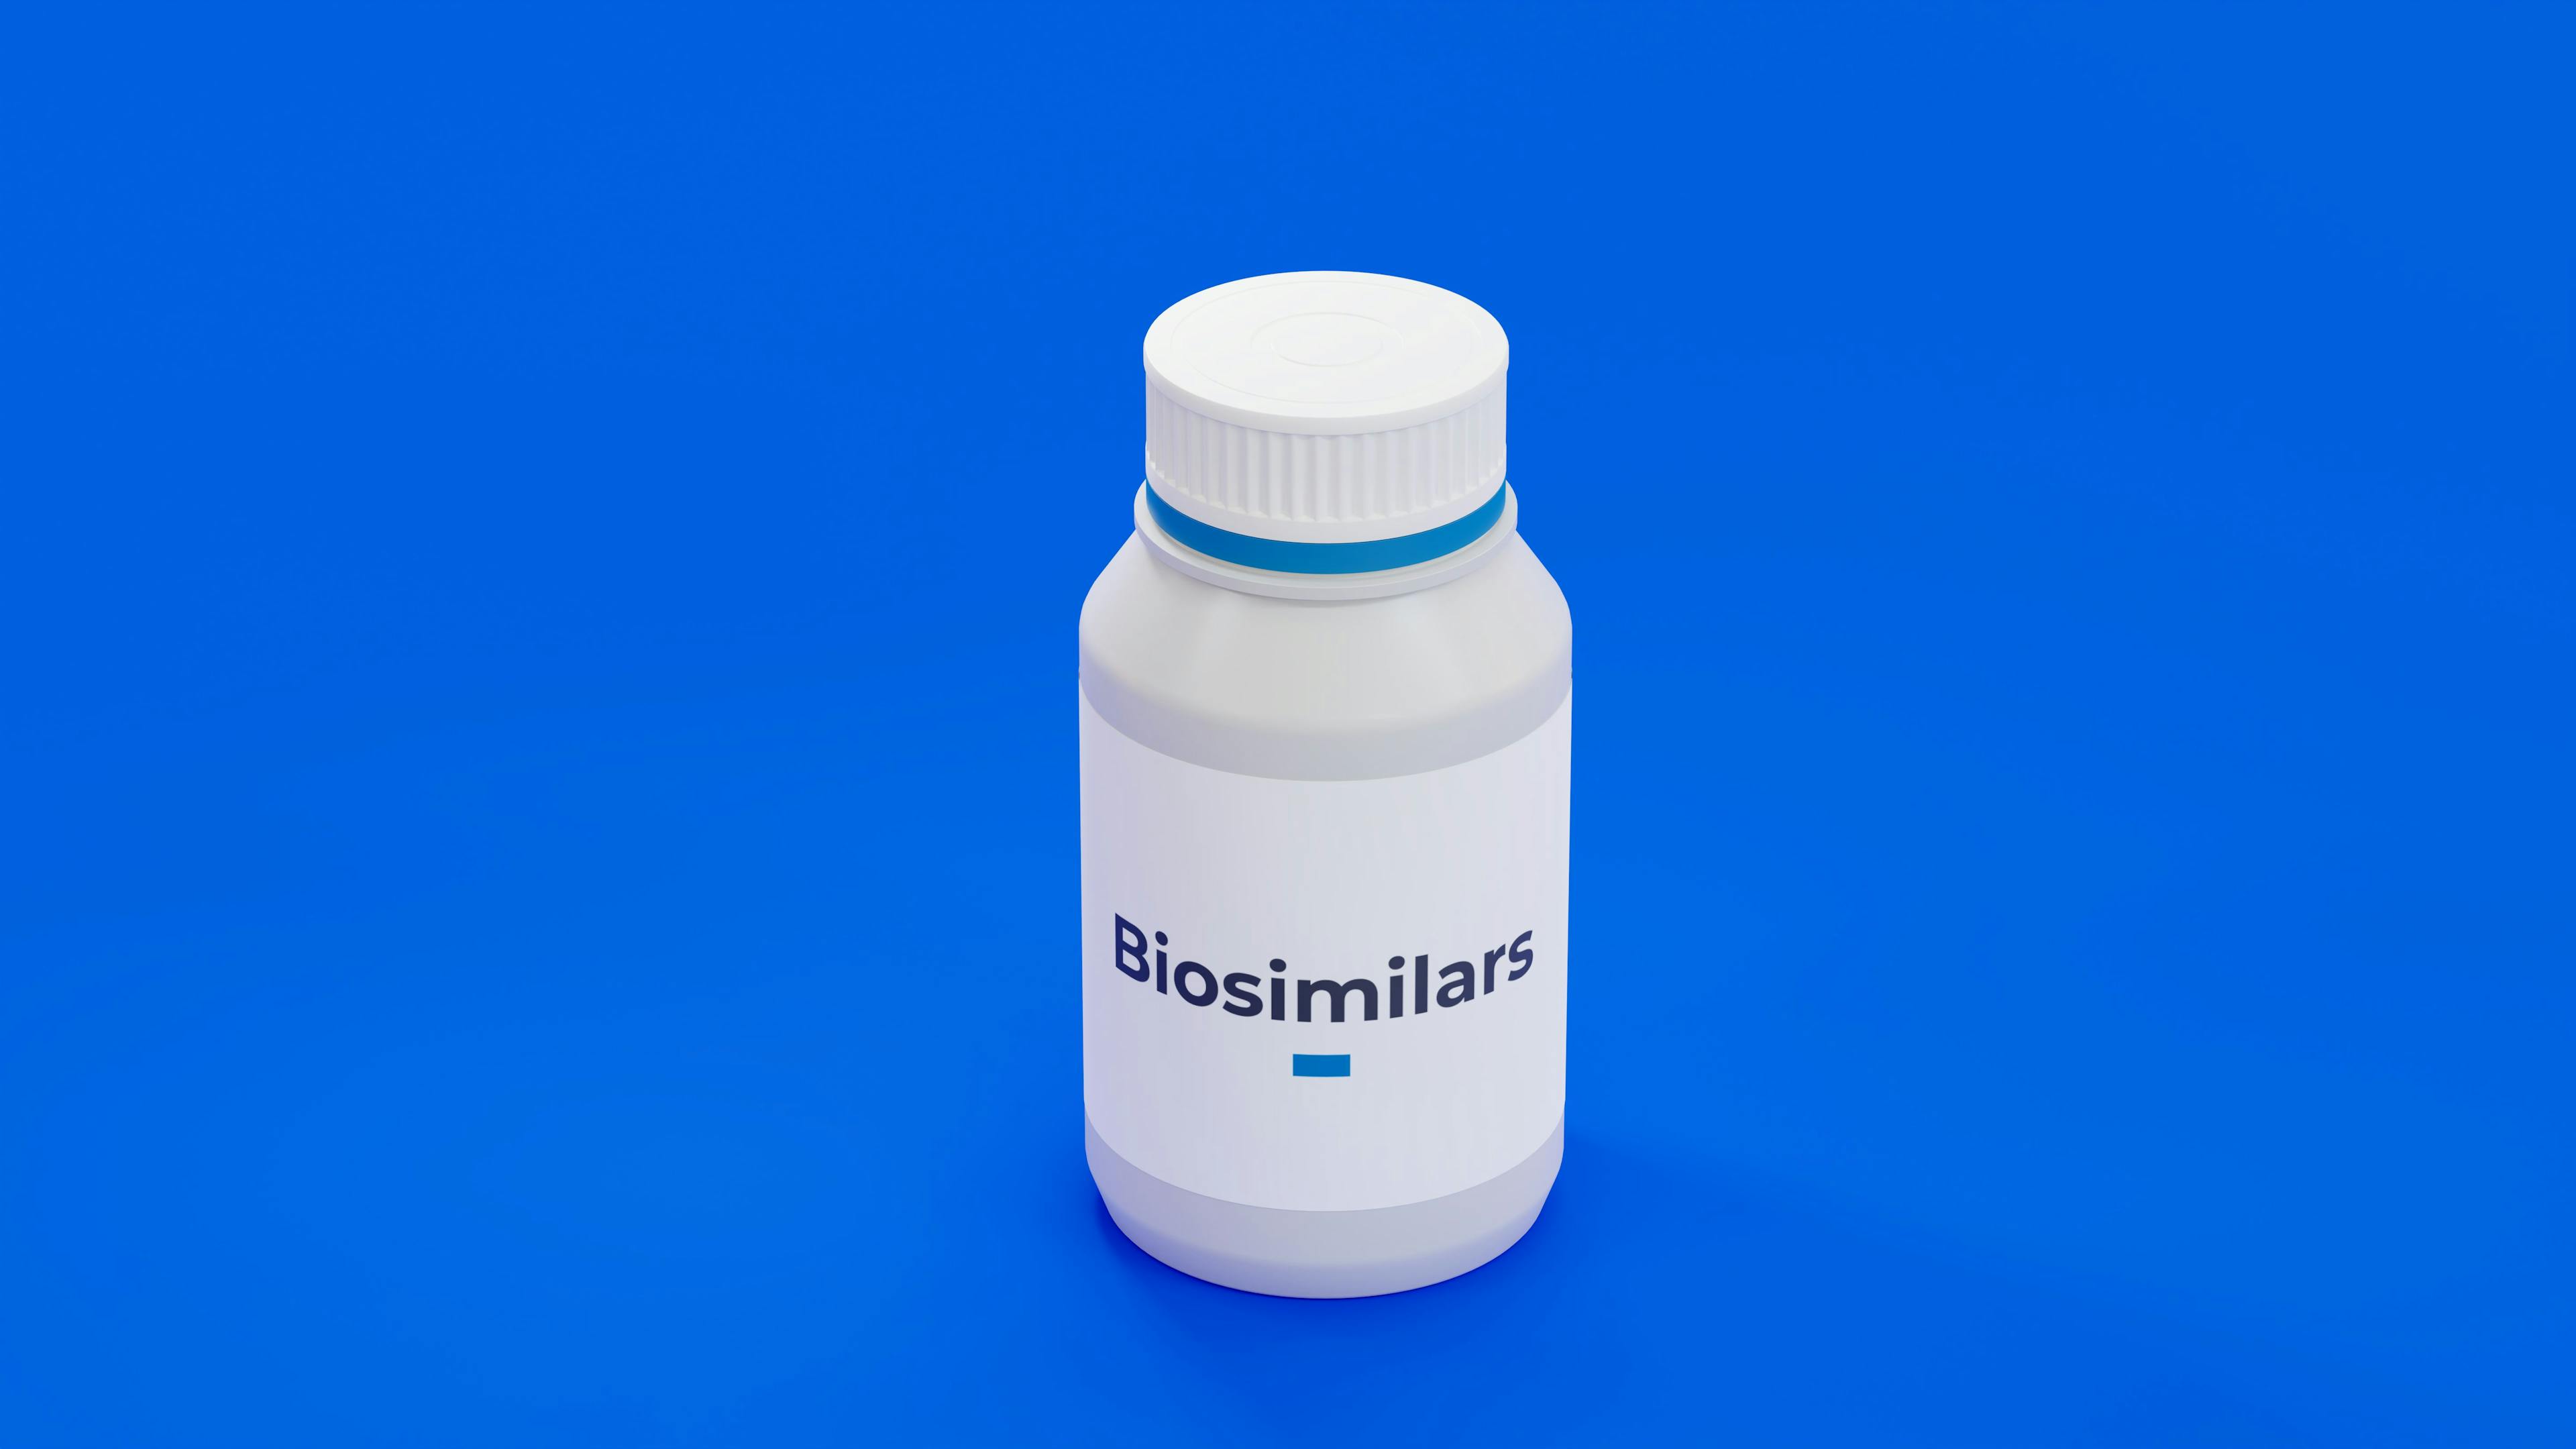 Biosimilars Could Fuel Potential Cost Savings in Health Care